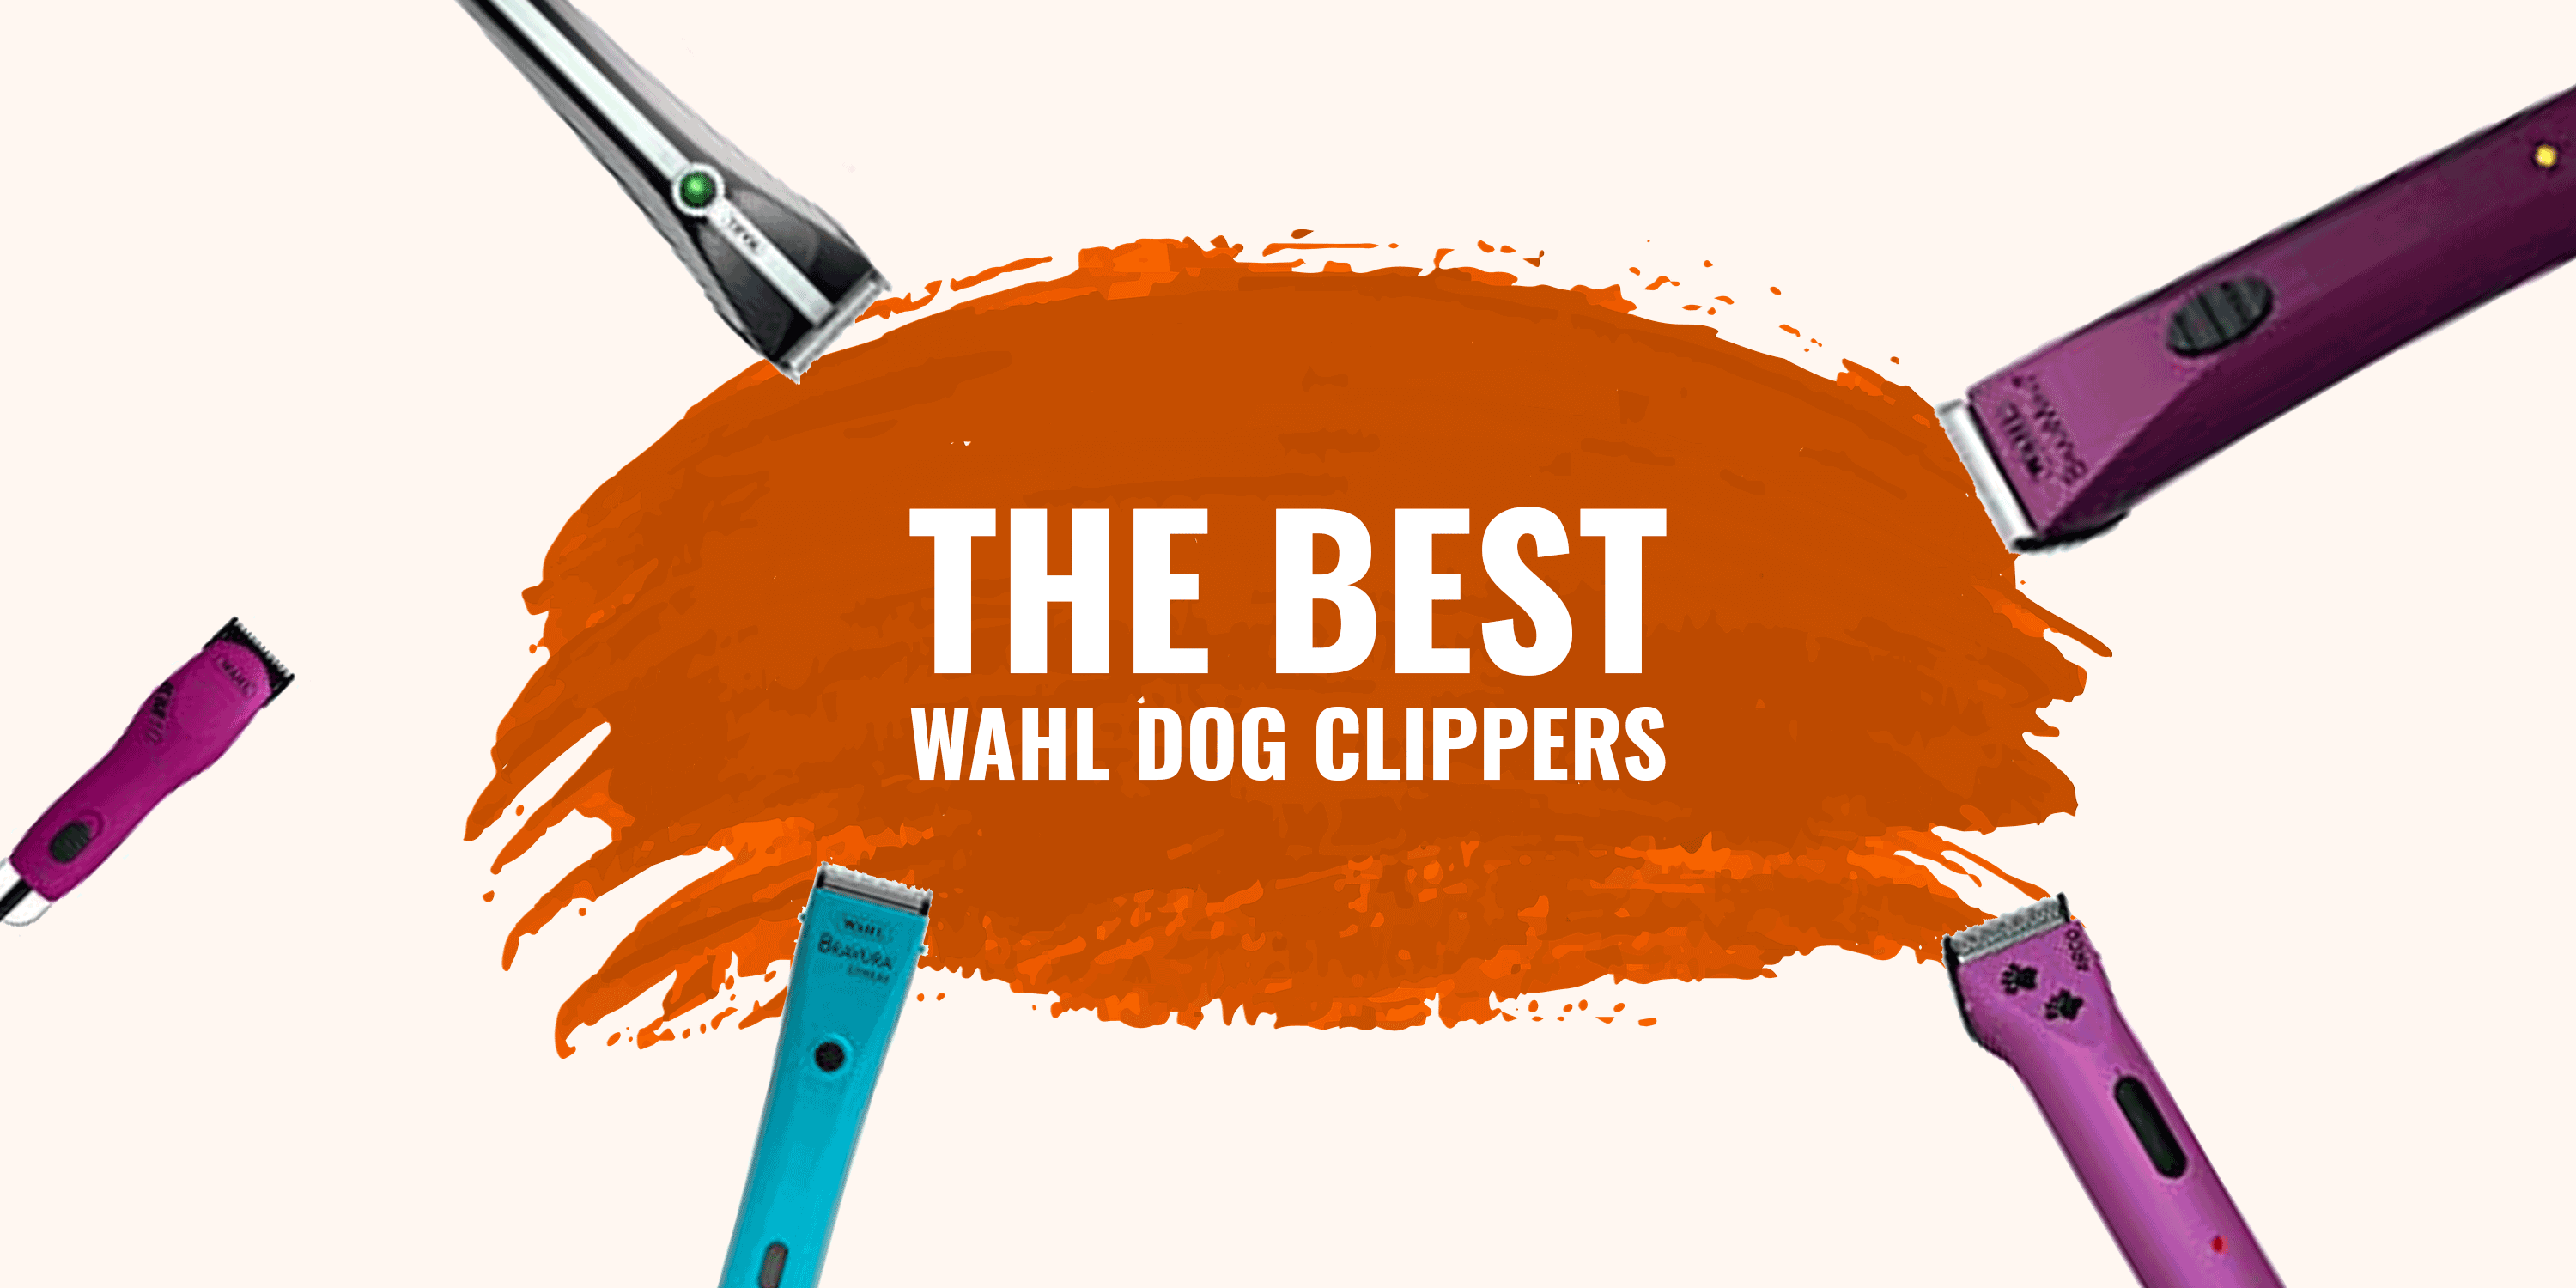 Top 5 Best Wahl Dog Clippers – Reviews 